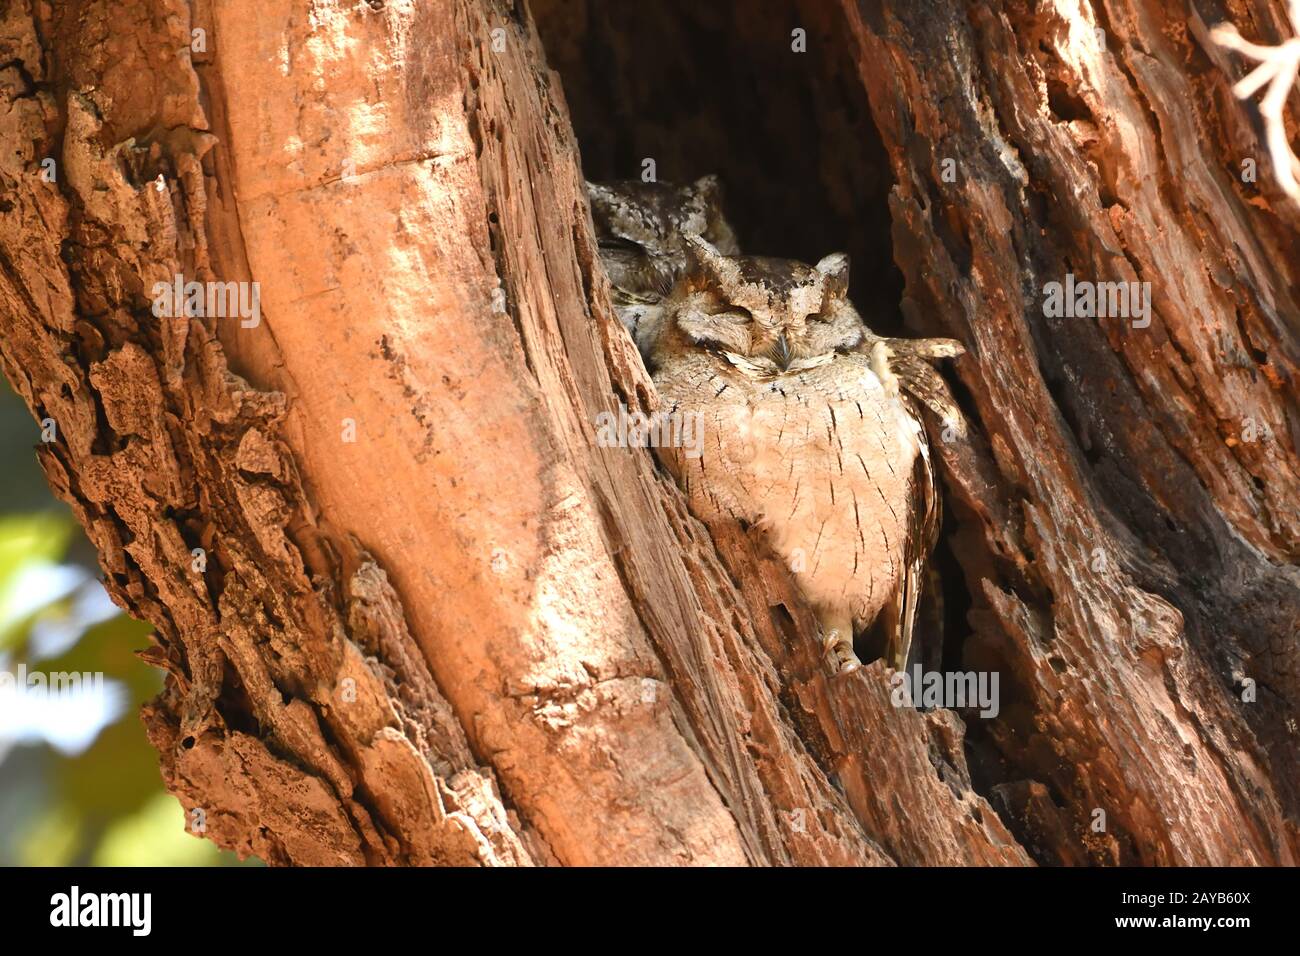 Pair of Indian Scops Owl resting and sleeping in Tree hole Stock Photo